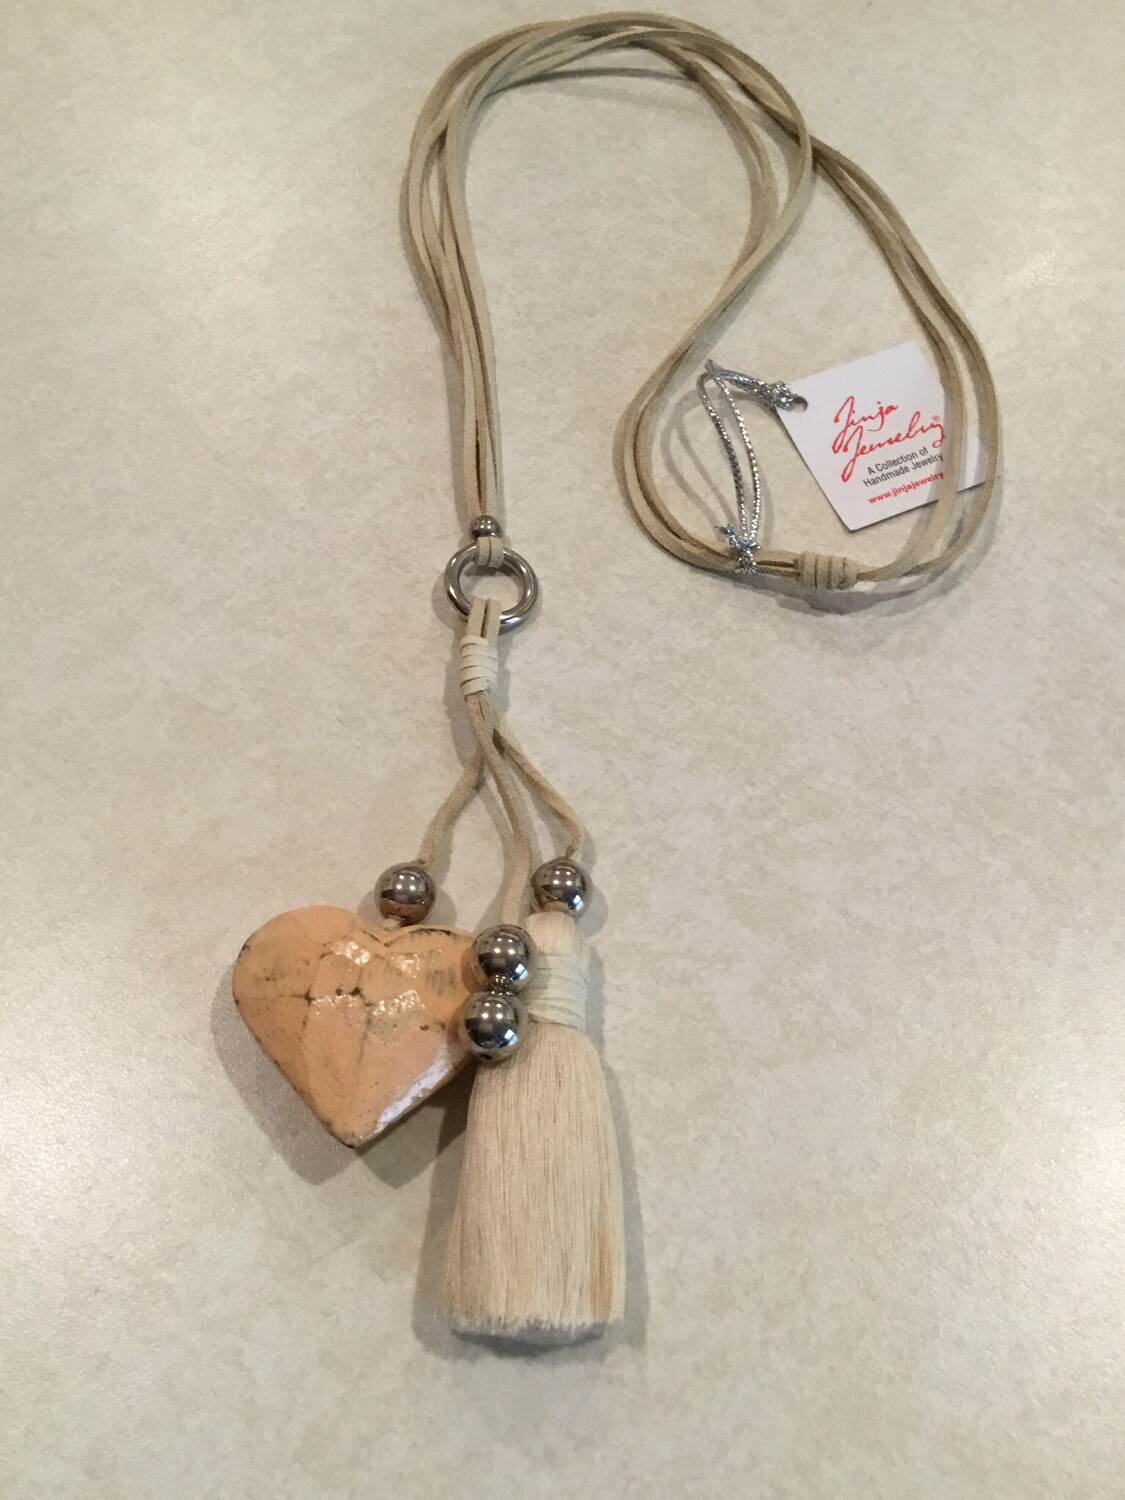 Boho Long Necklace With Beautiful Tassel And Small Wooden Heart.